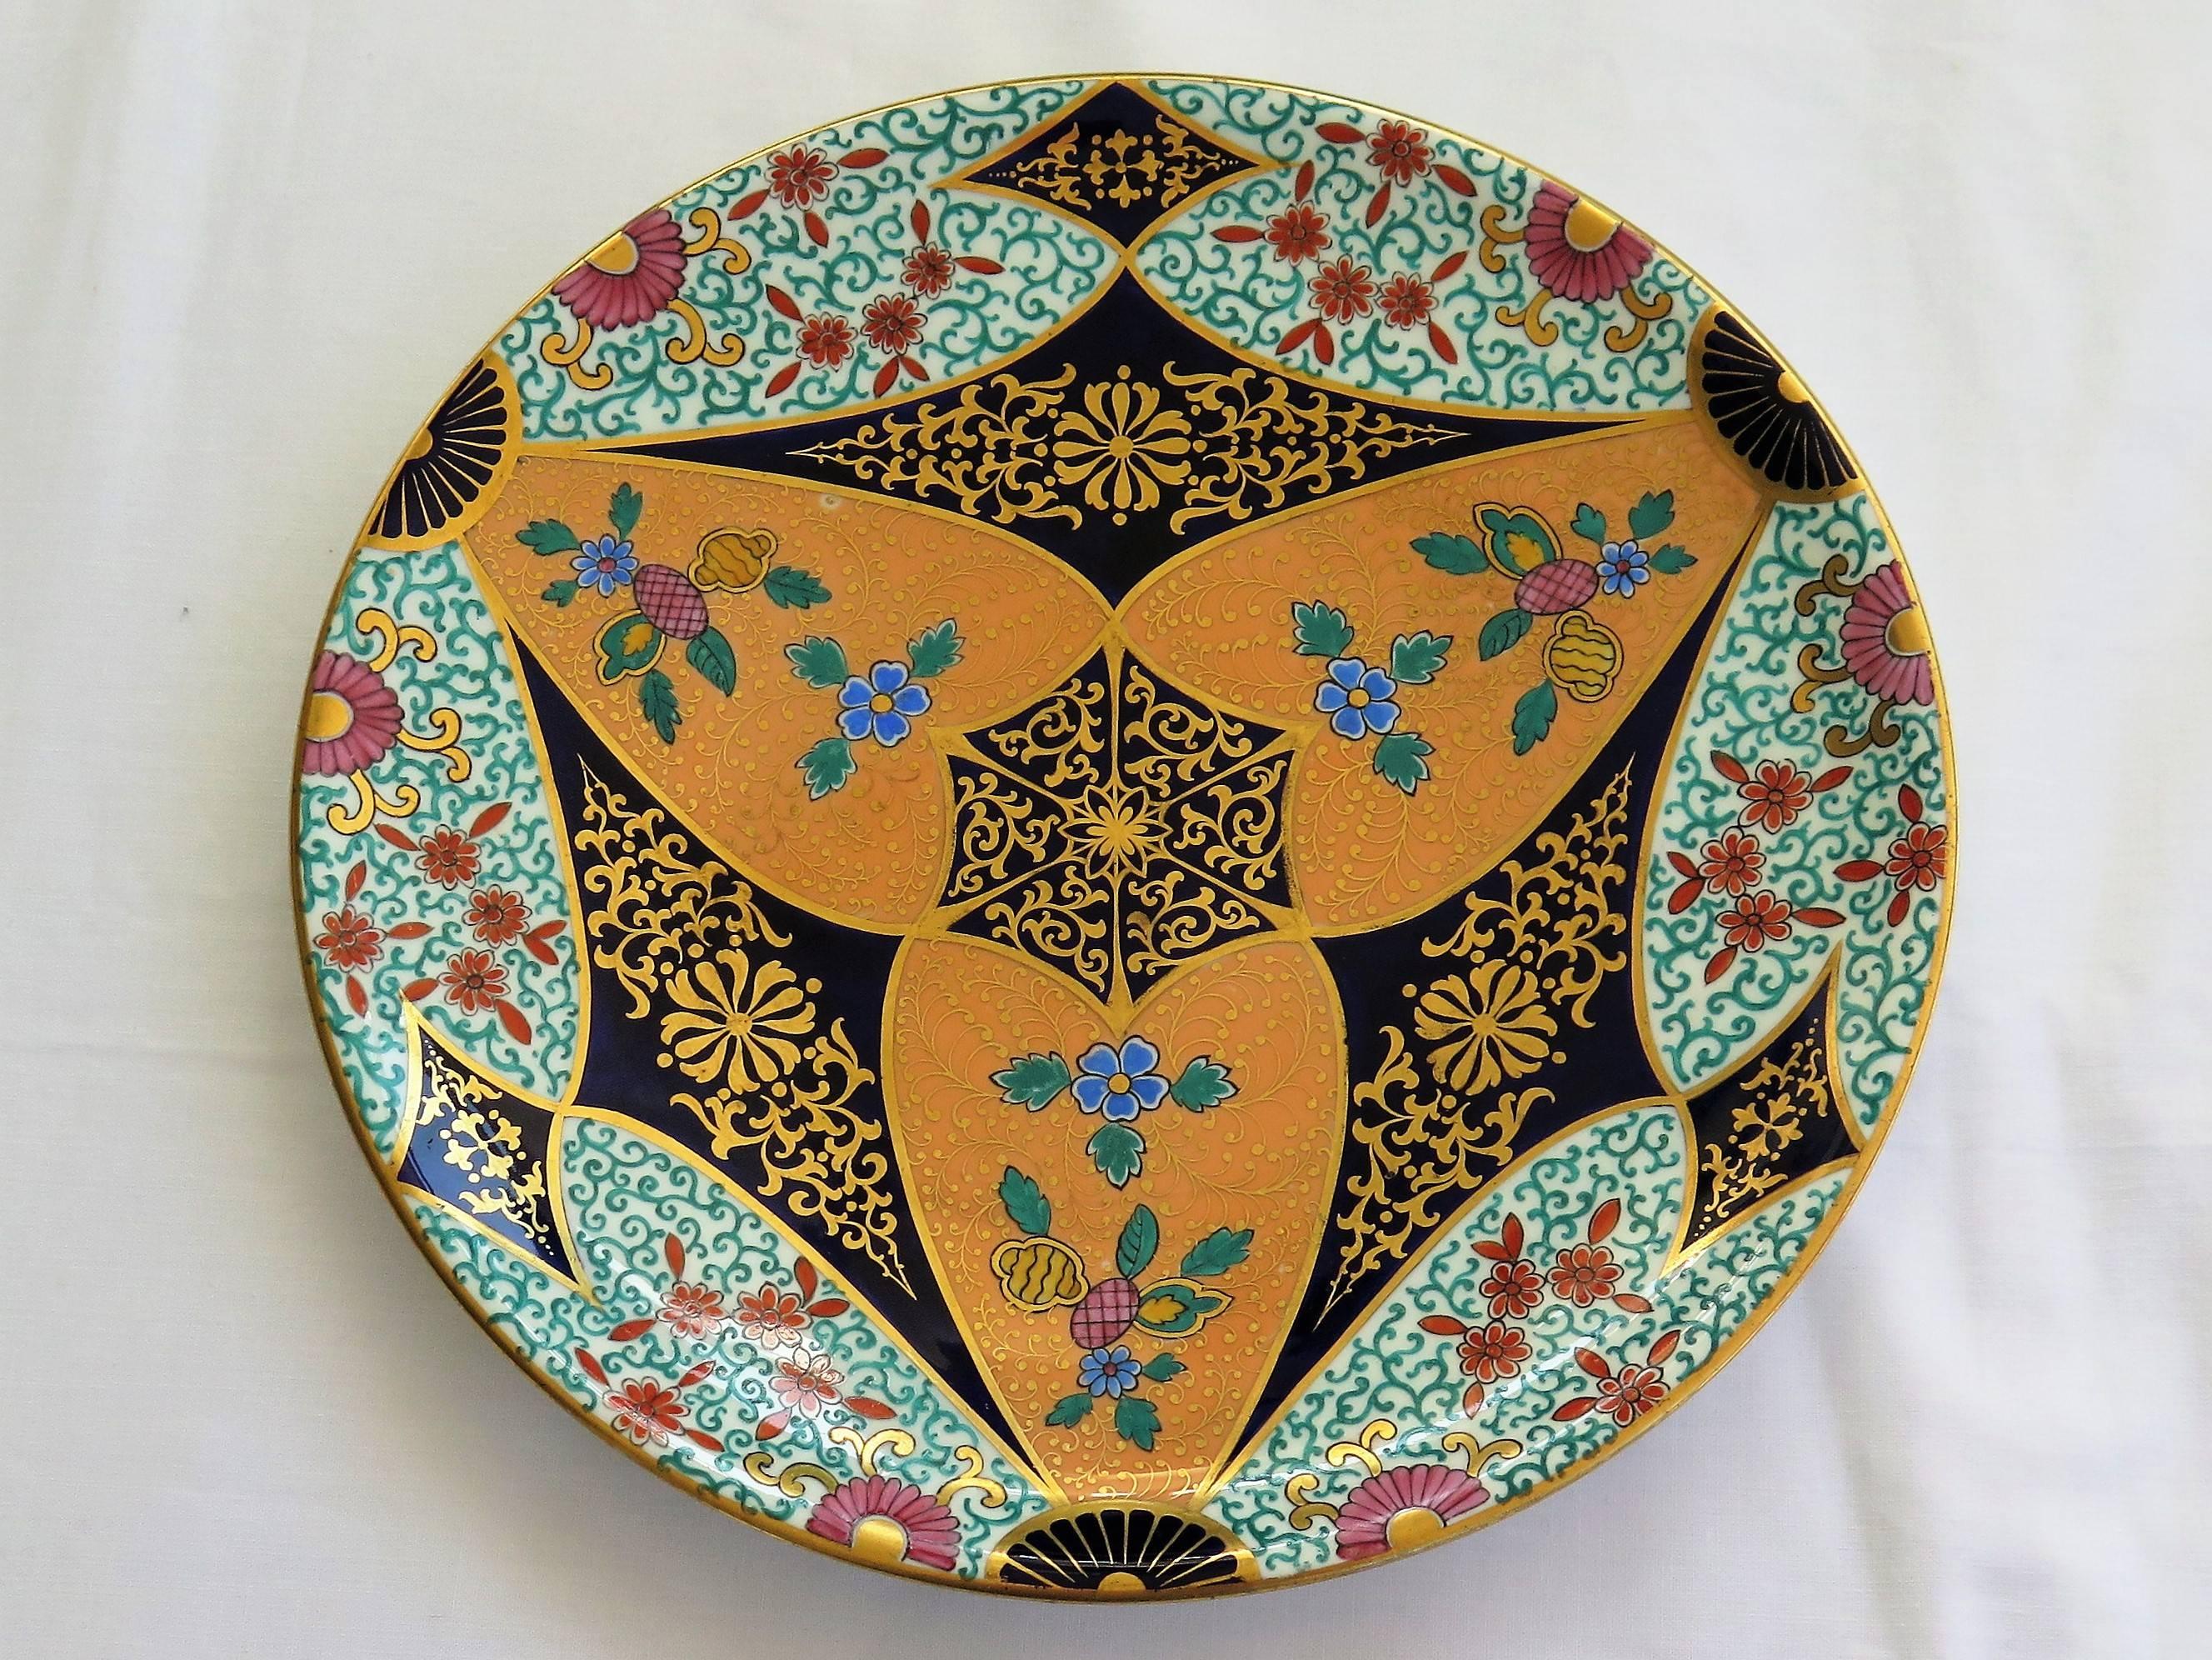 This is a beautiful early porcelain cabinet plate, all hand-painted, from the Davenport Company of Longport, Staffordshire Potteries, England, dating to very early in the 19th century, Georgian period, circa 1810.

The Plate has a striking oriental